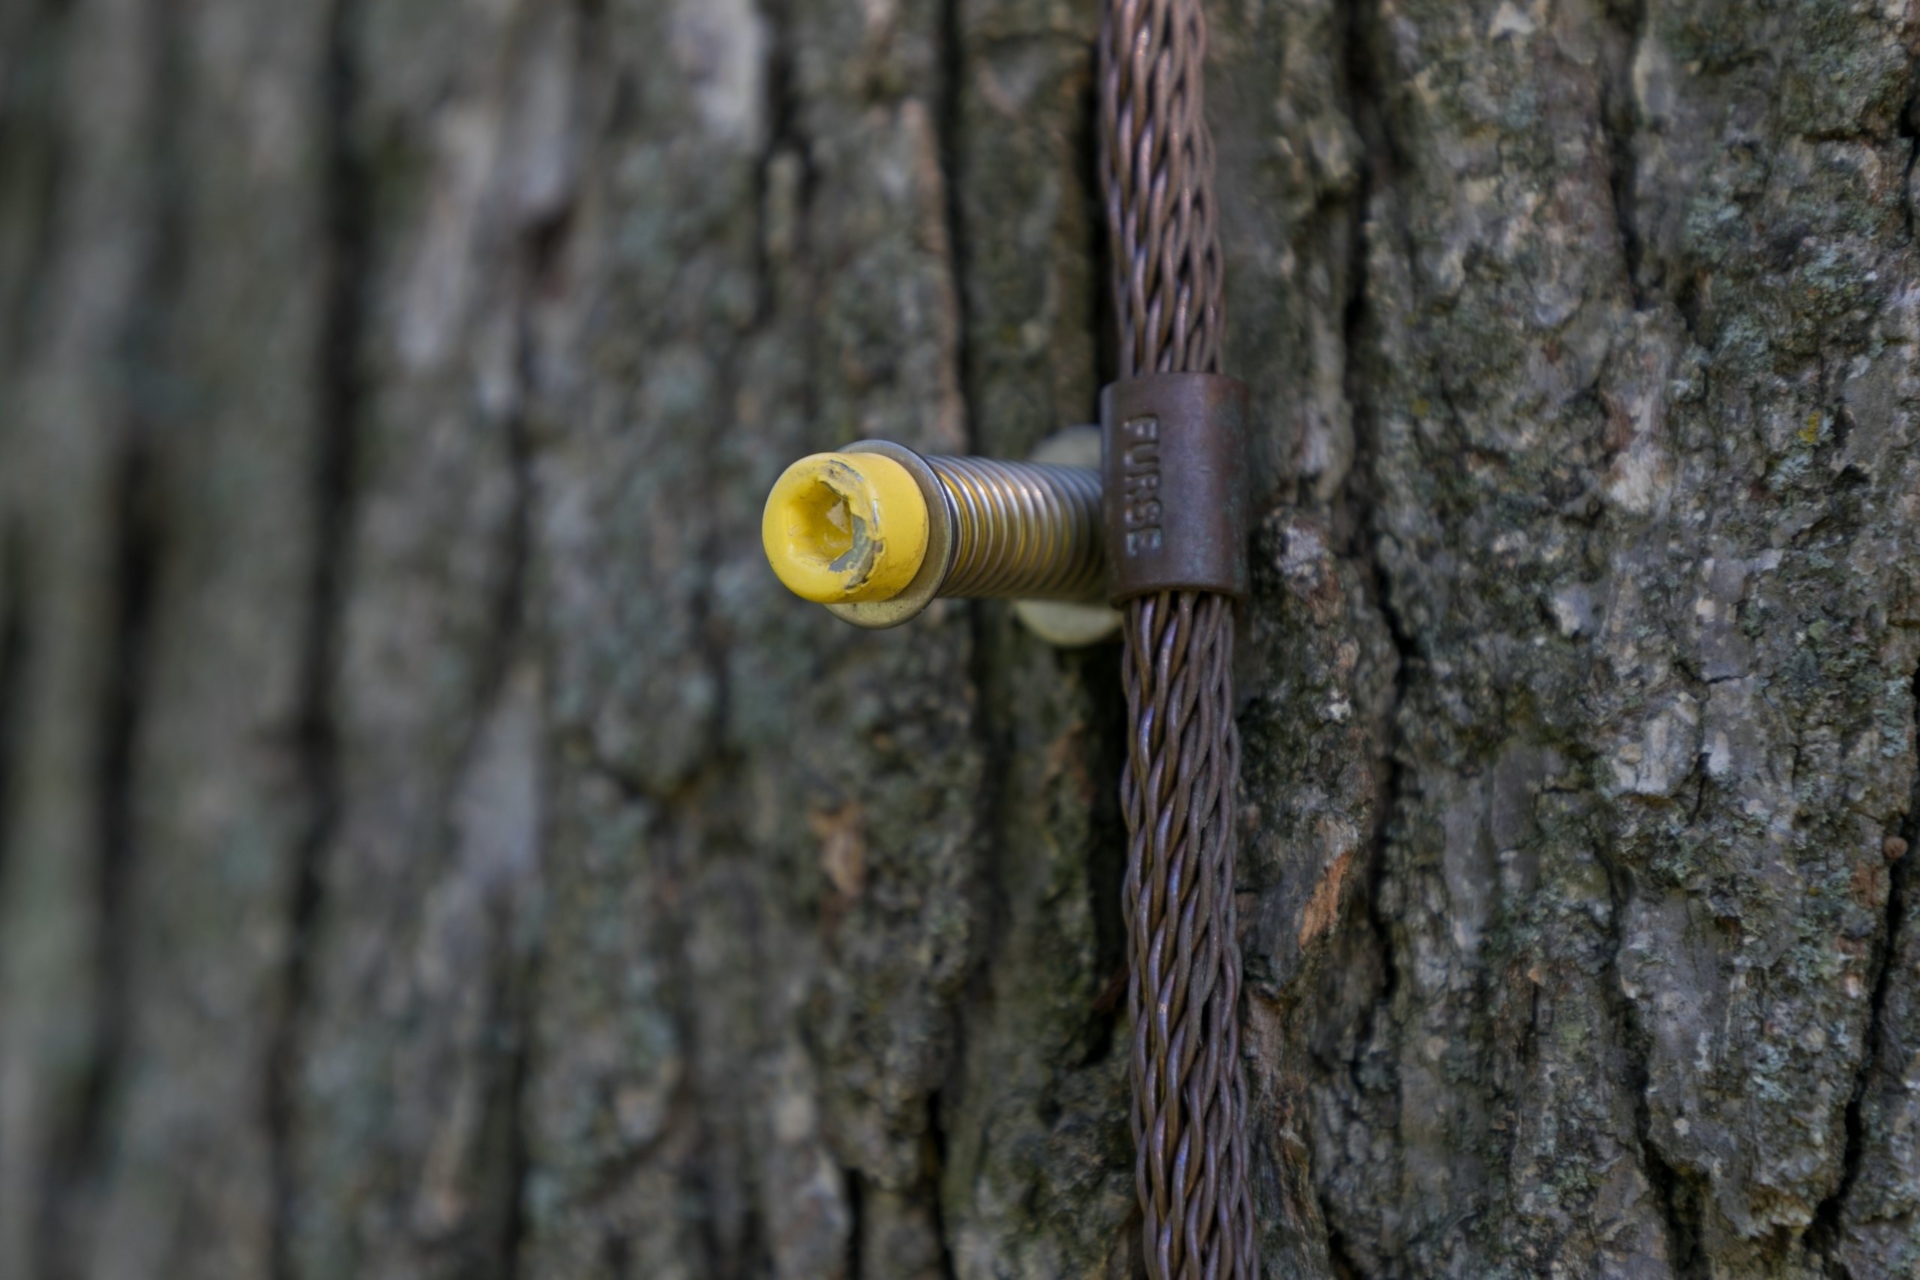 Close up of a lightning cable on a tree